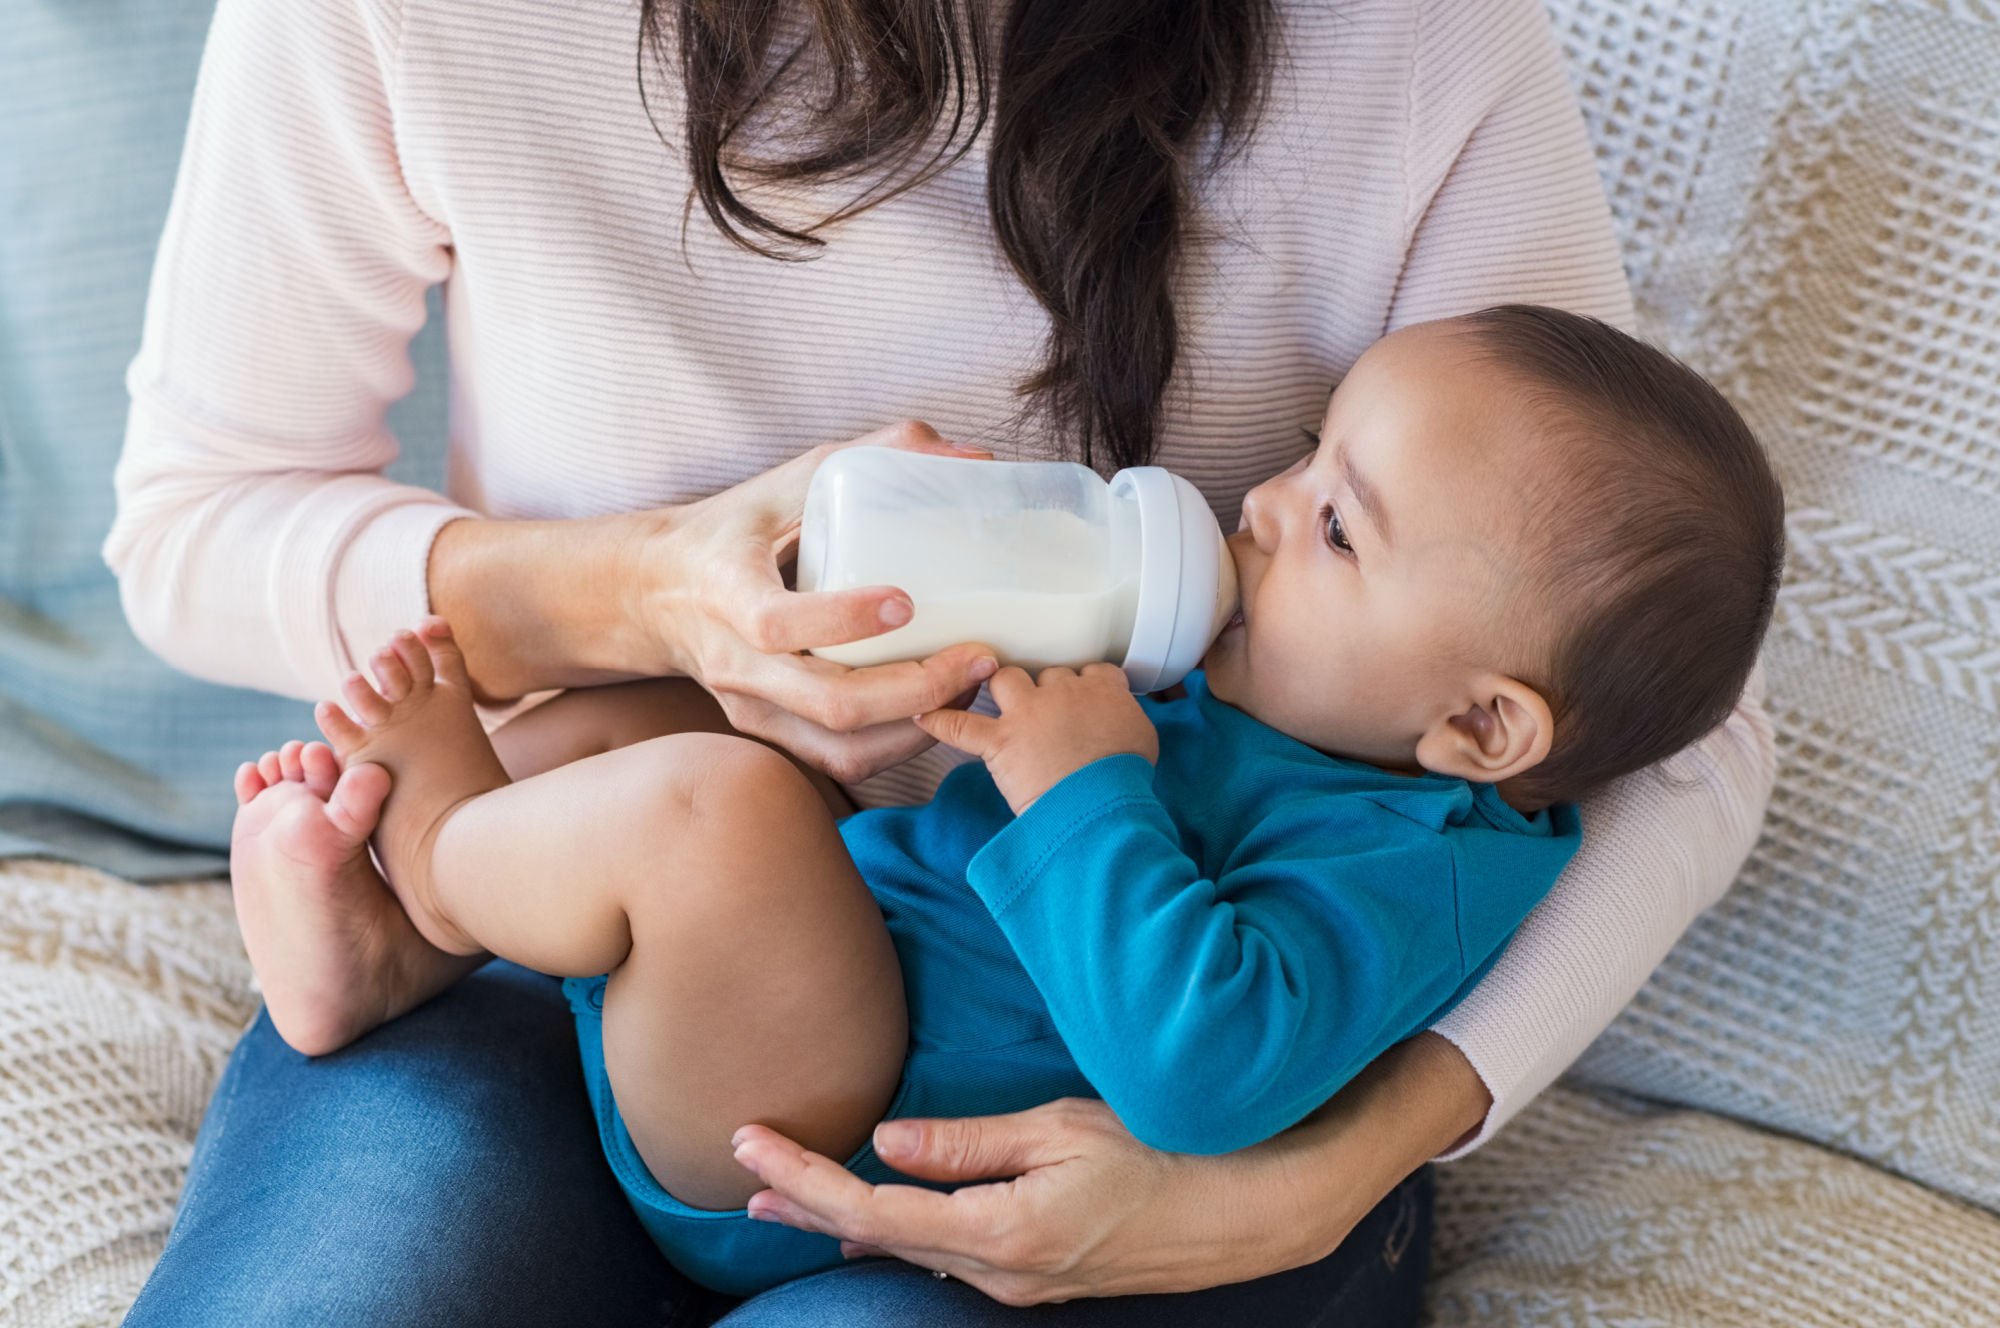 Baby wearing blue onesie being held and bottle fed by a woman wearing a pale pink shirt and jeans sitting on a sofa_PBB.jpg